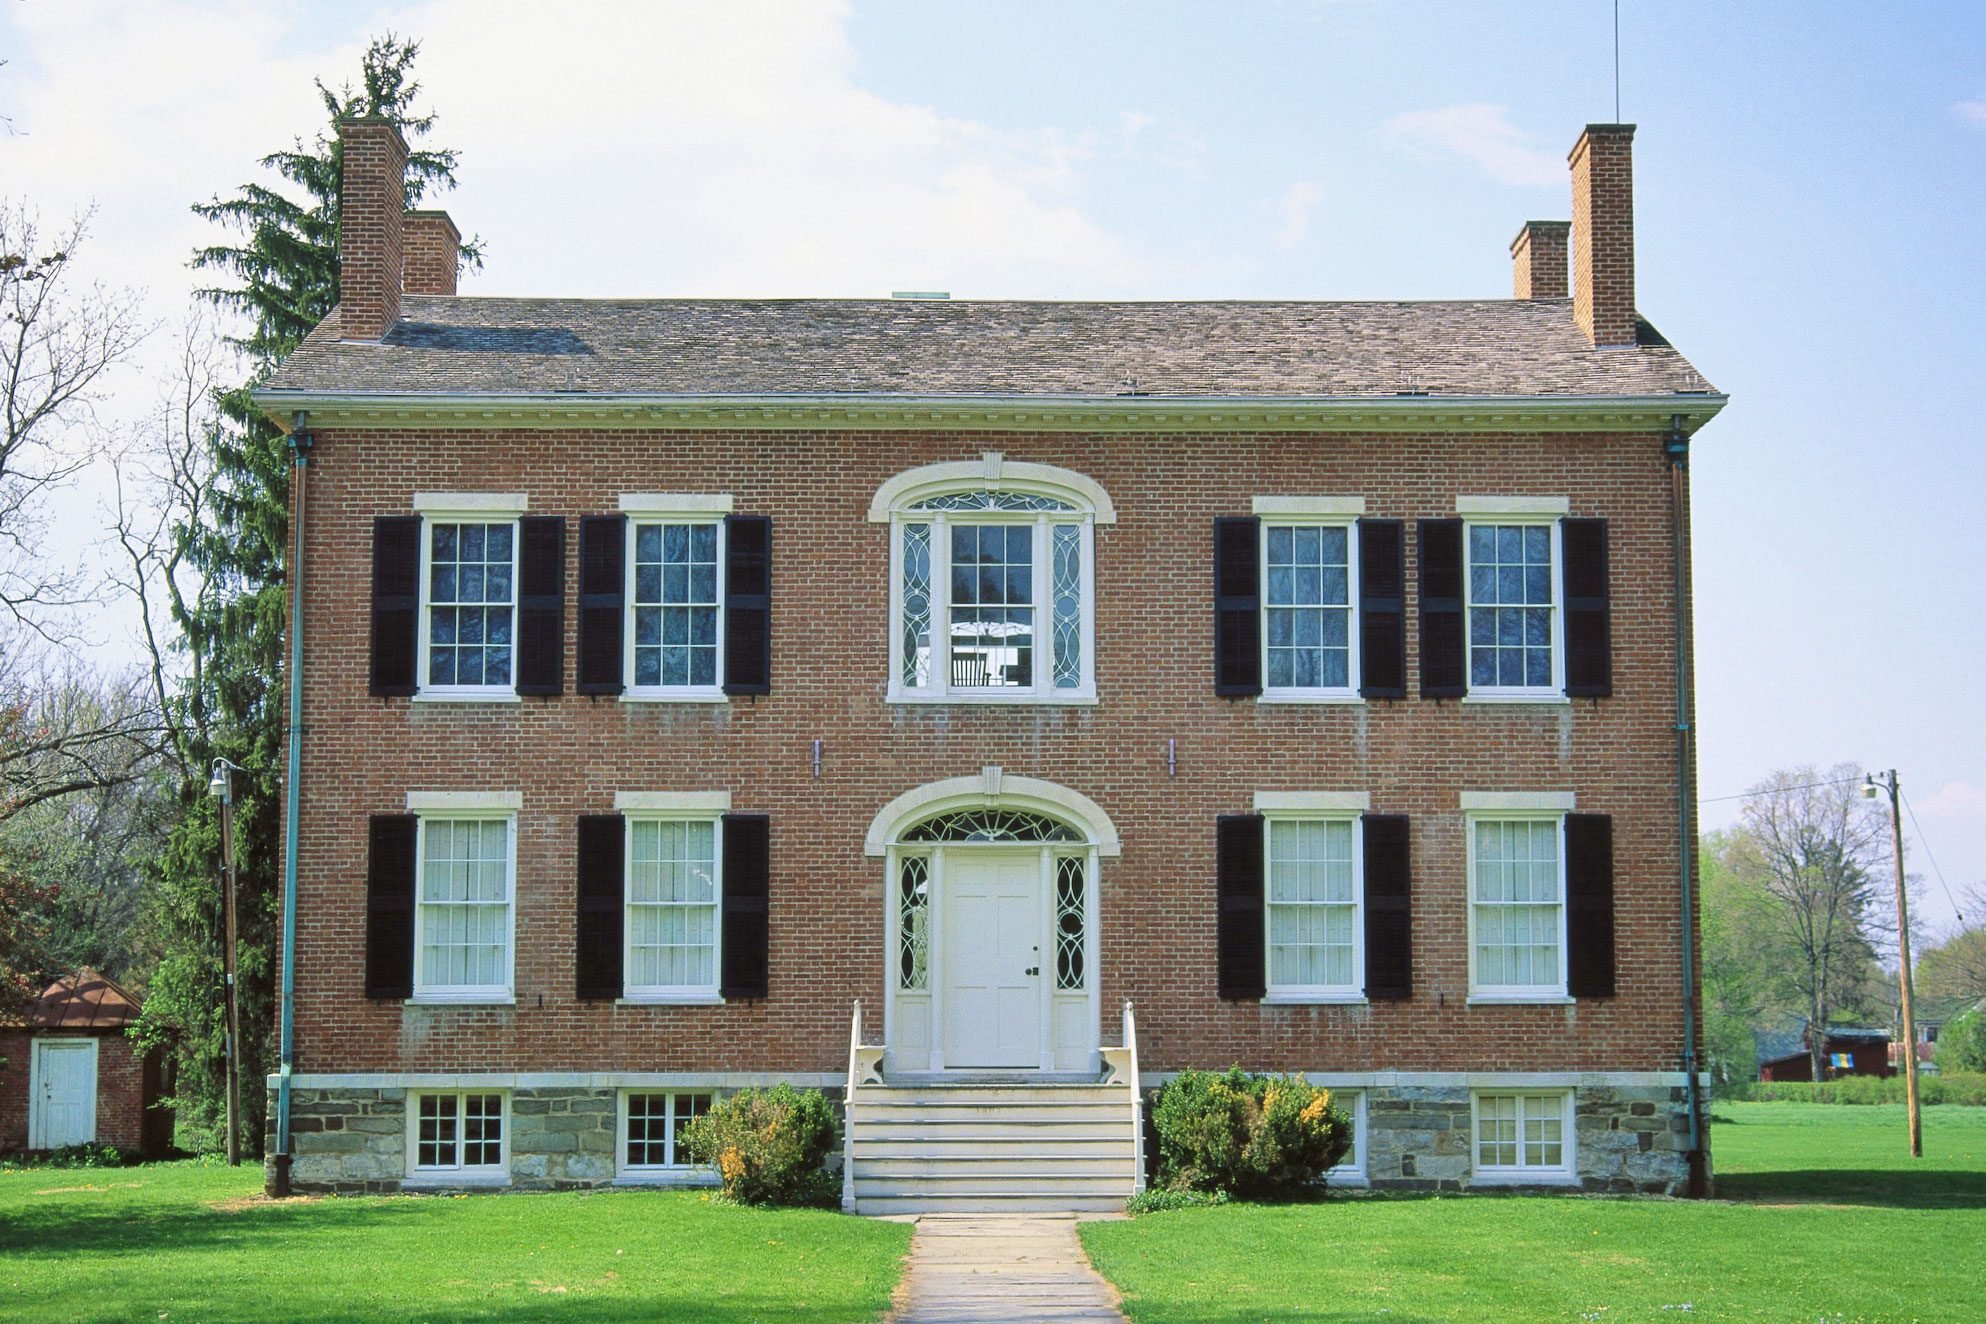 What To Consider Before Restoring a Historic Home